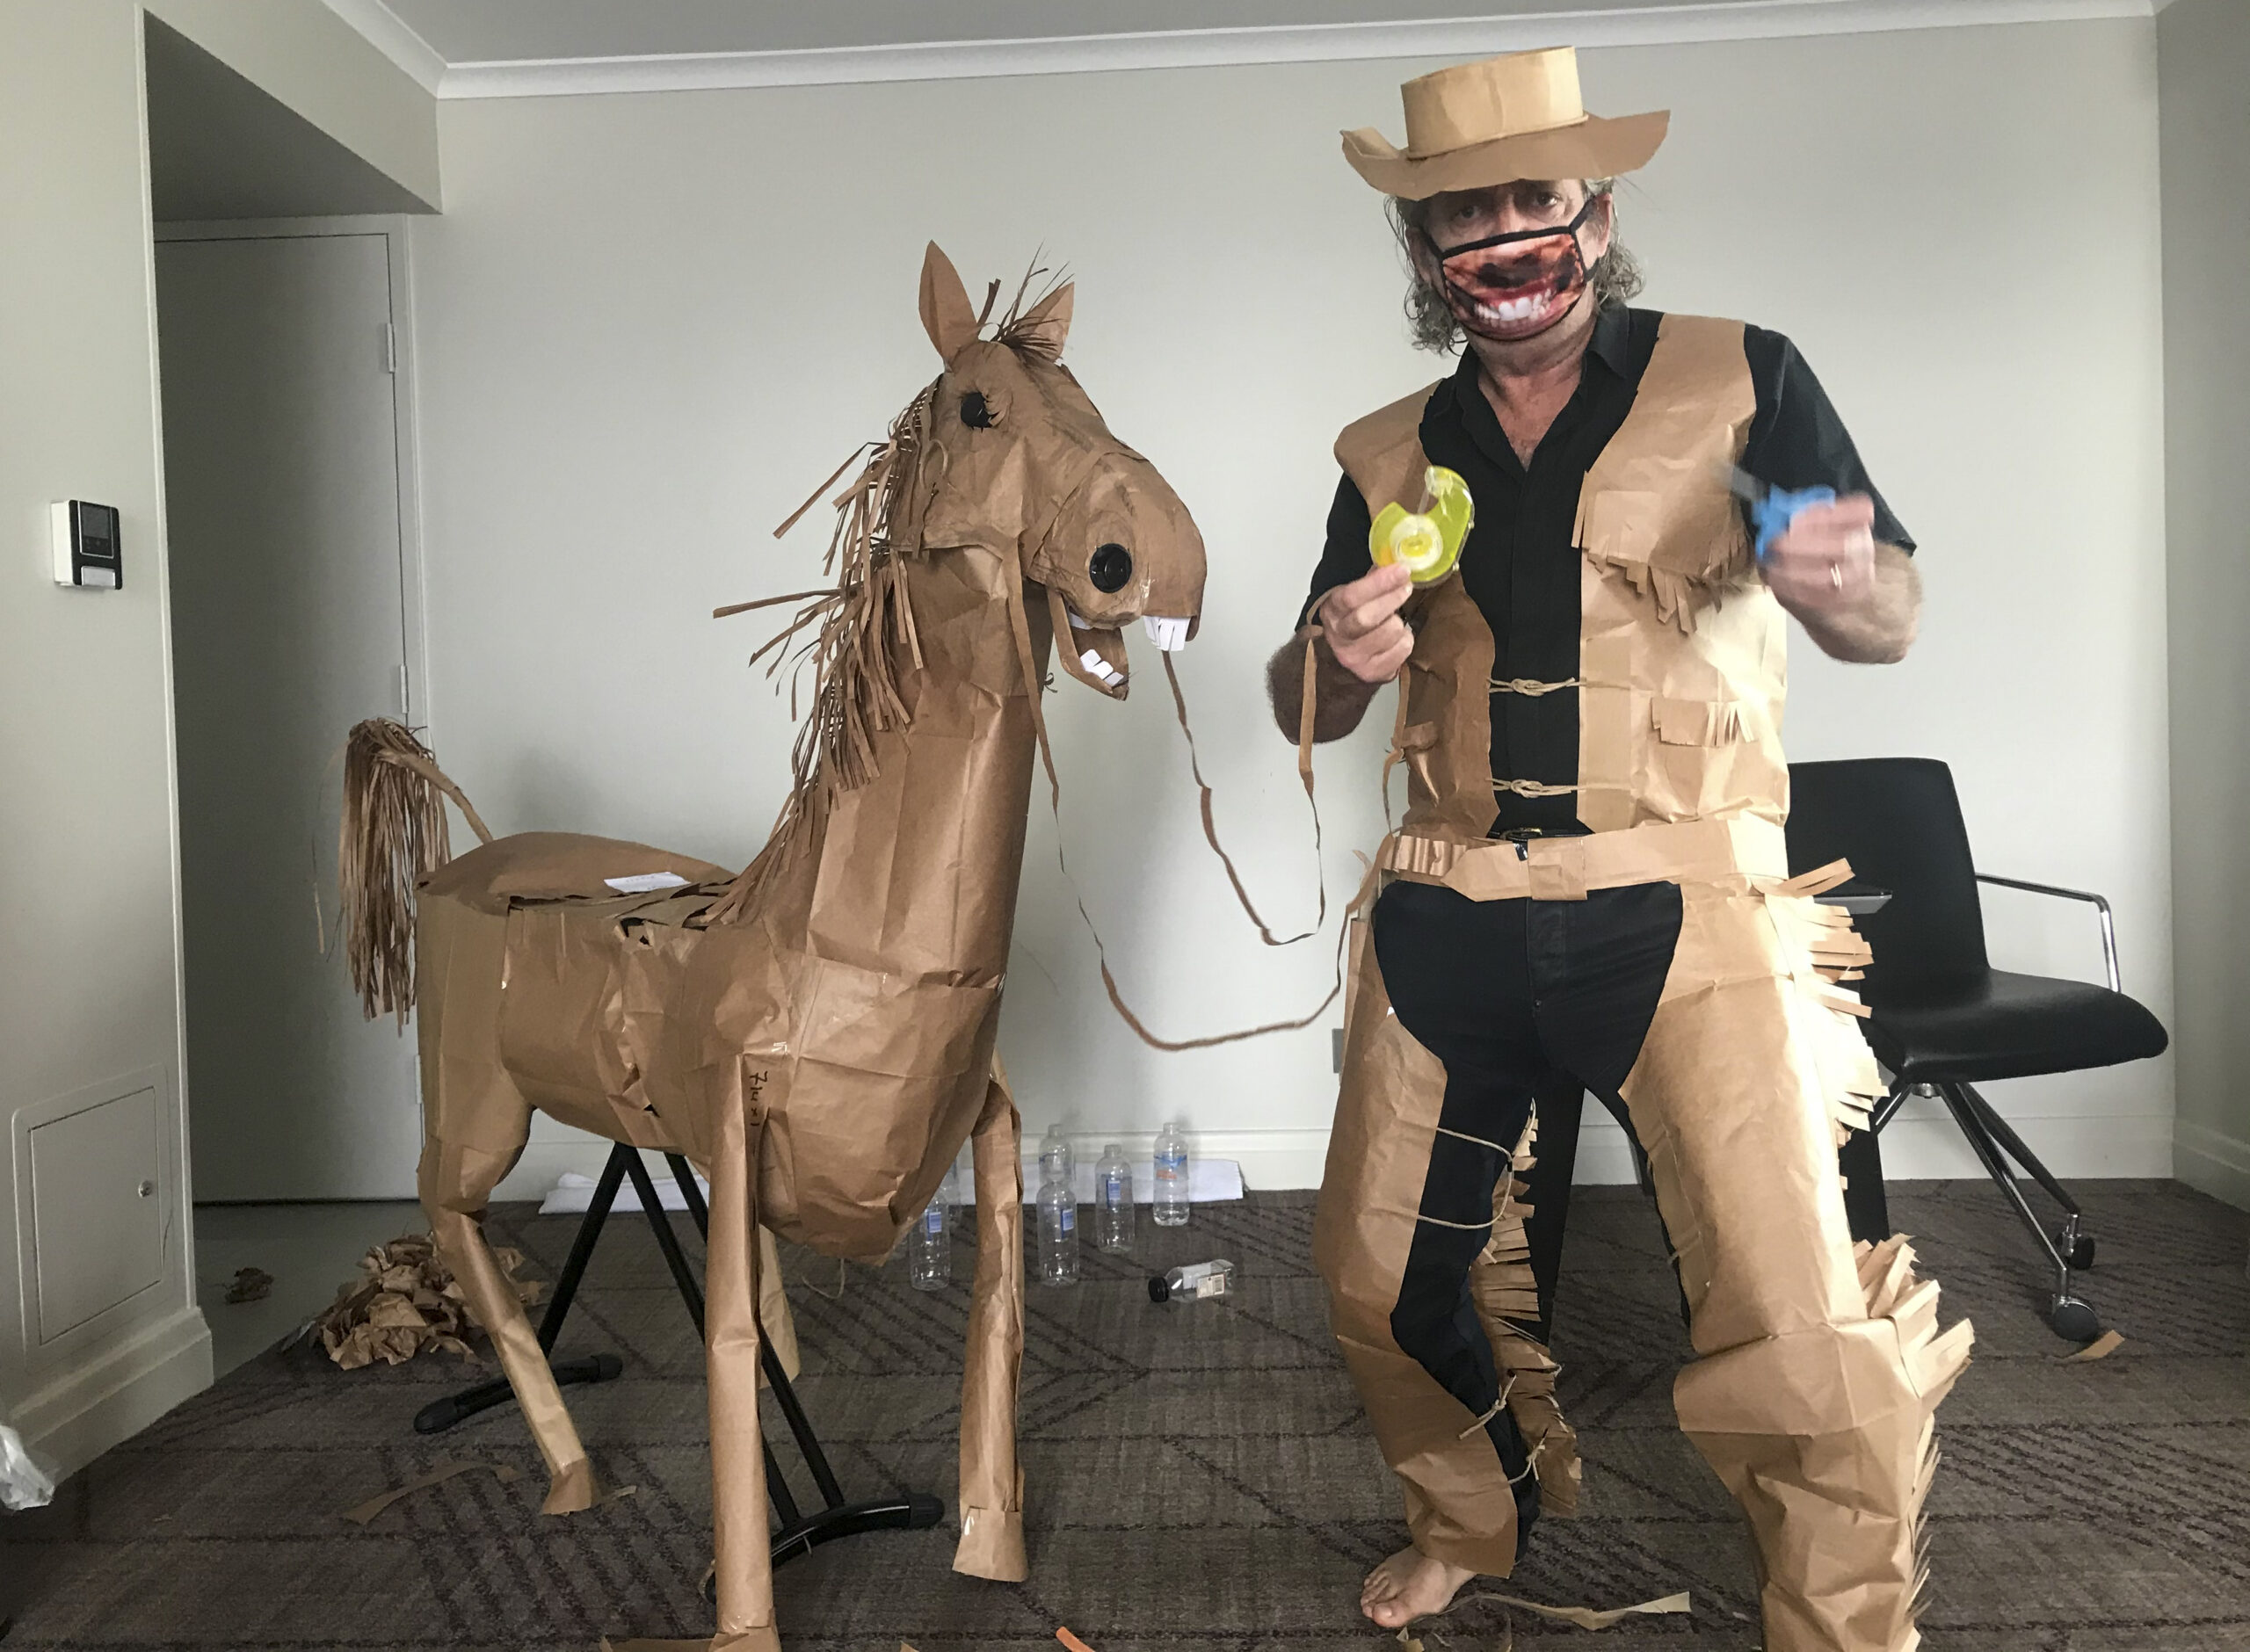 CORRECTS NAME - David Marriott poses with his paper horse "Russell" in his hotel room in Brisbane, Australia, April 1, 2021. While in quarantine inside his Brisbane hotel room, the art director was bored and started making a cowboy outfit from the paper bags his meals were being delivered in. His project expanded to include a horse and a clingfilm villain that he has daily adventures with, in images that have gained a huge online following. (David Marriott via AP)